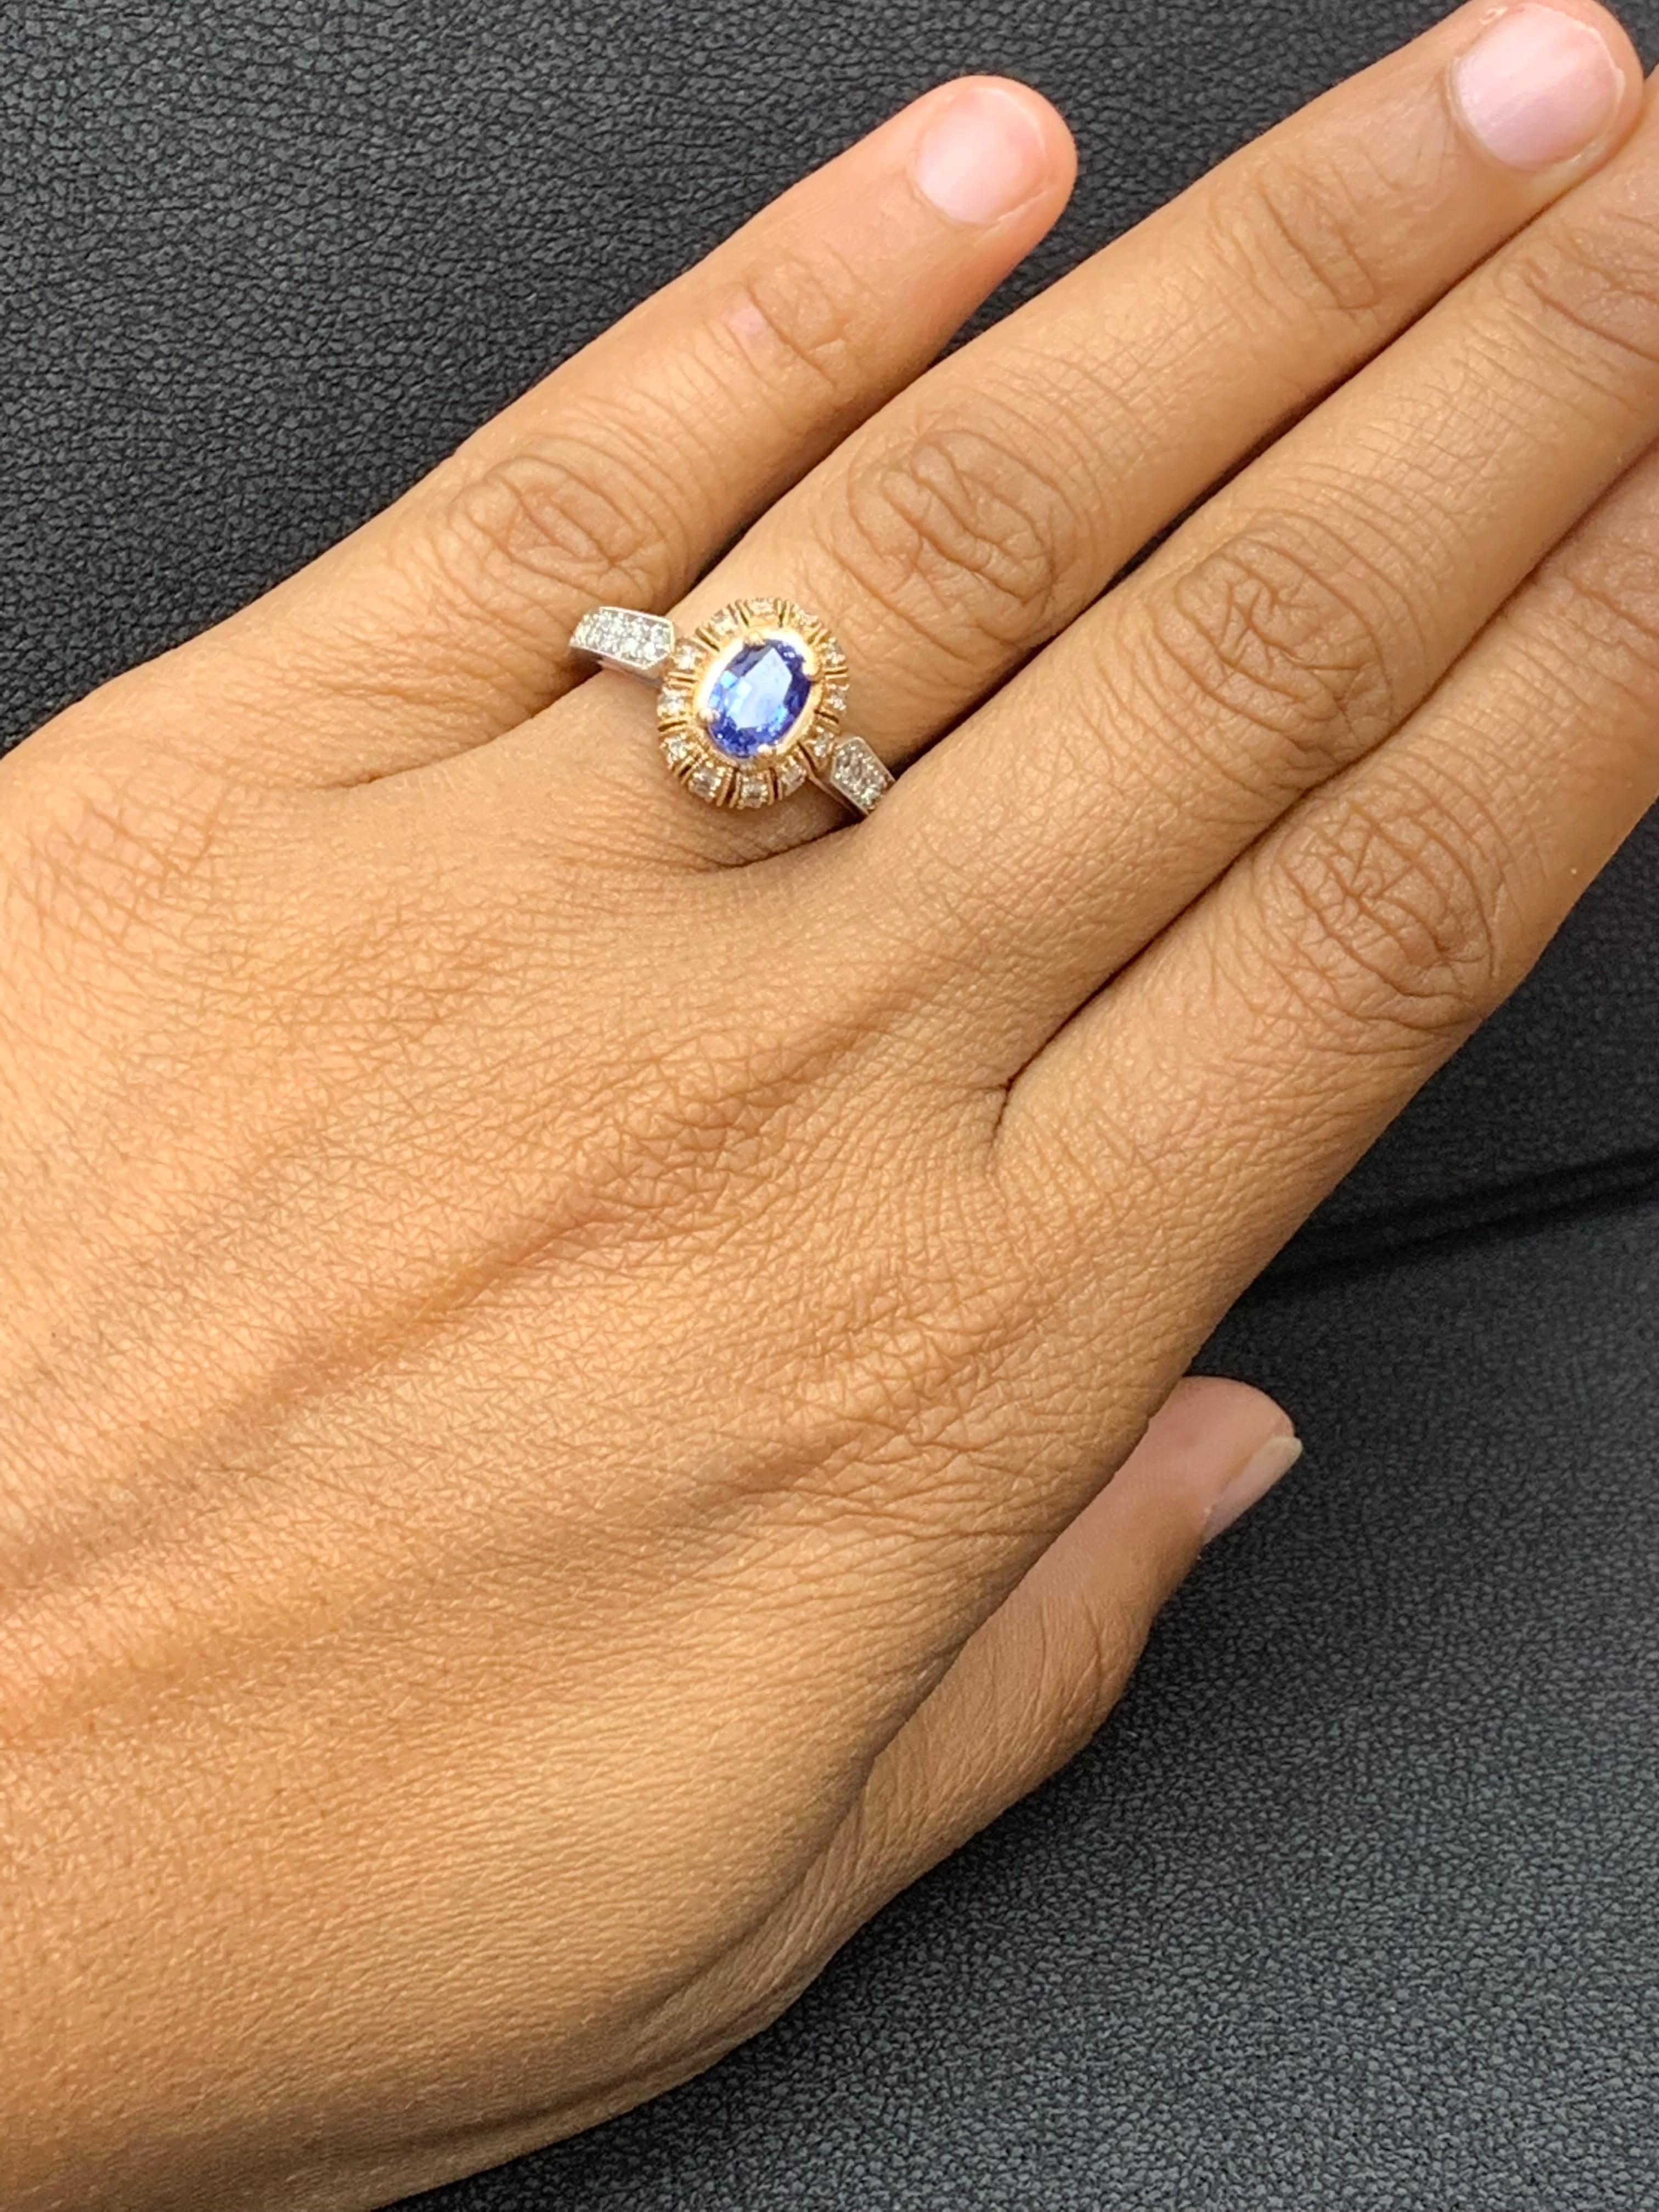 A vibrant 0.80 carat oval cut blue sapphire takes center stage as it elegantly contrasts the rose gold around it . Accent diamonds weigh 0.54 carats total. Made in 18 karat mix gold.

Size 6.5 US (Sizable). One of a Kind  piece.
All diamonds are GH